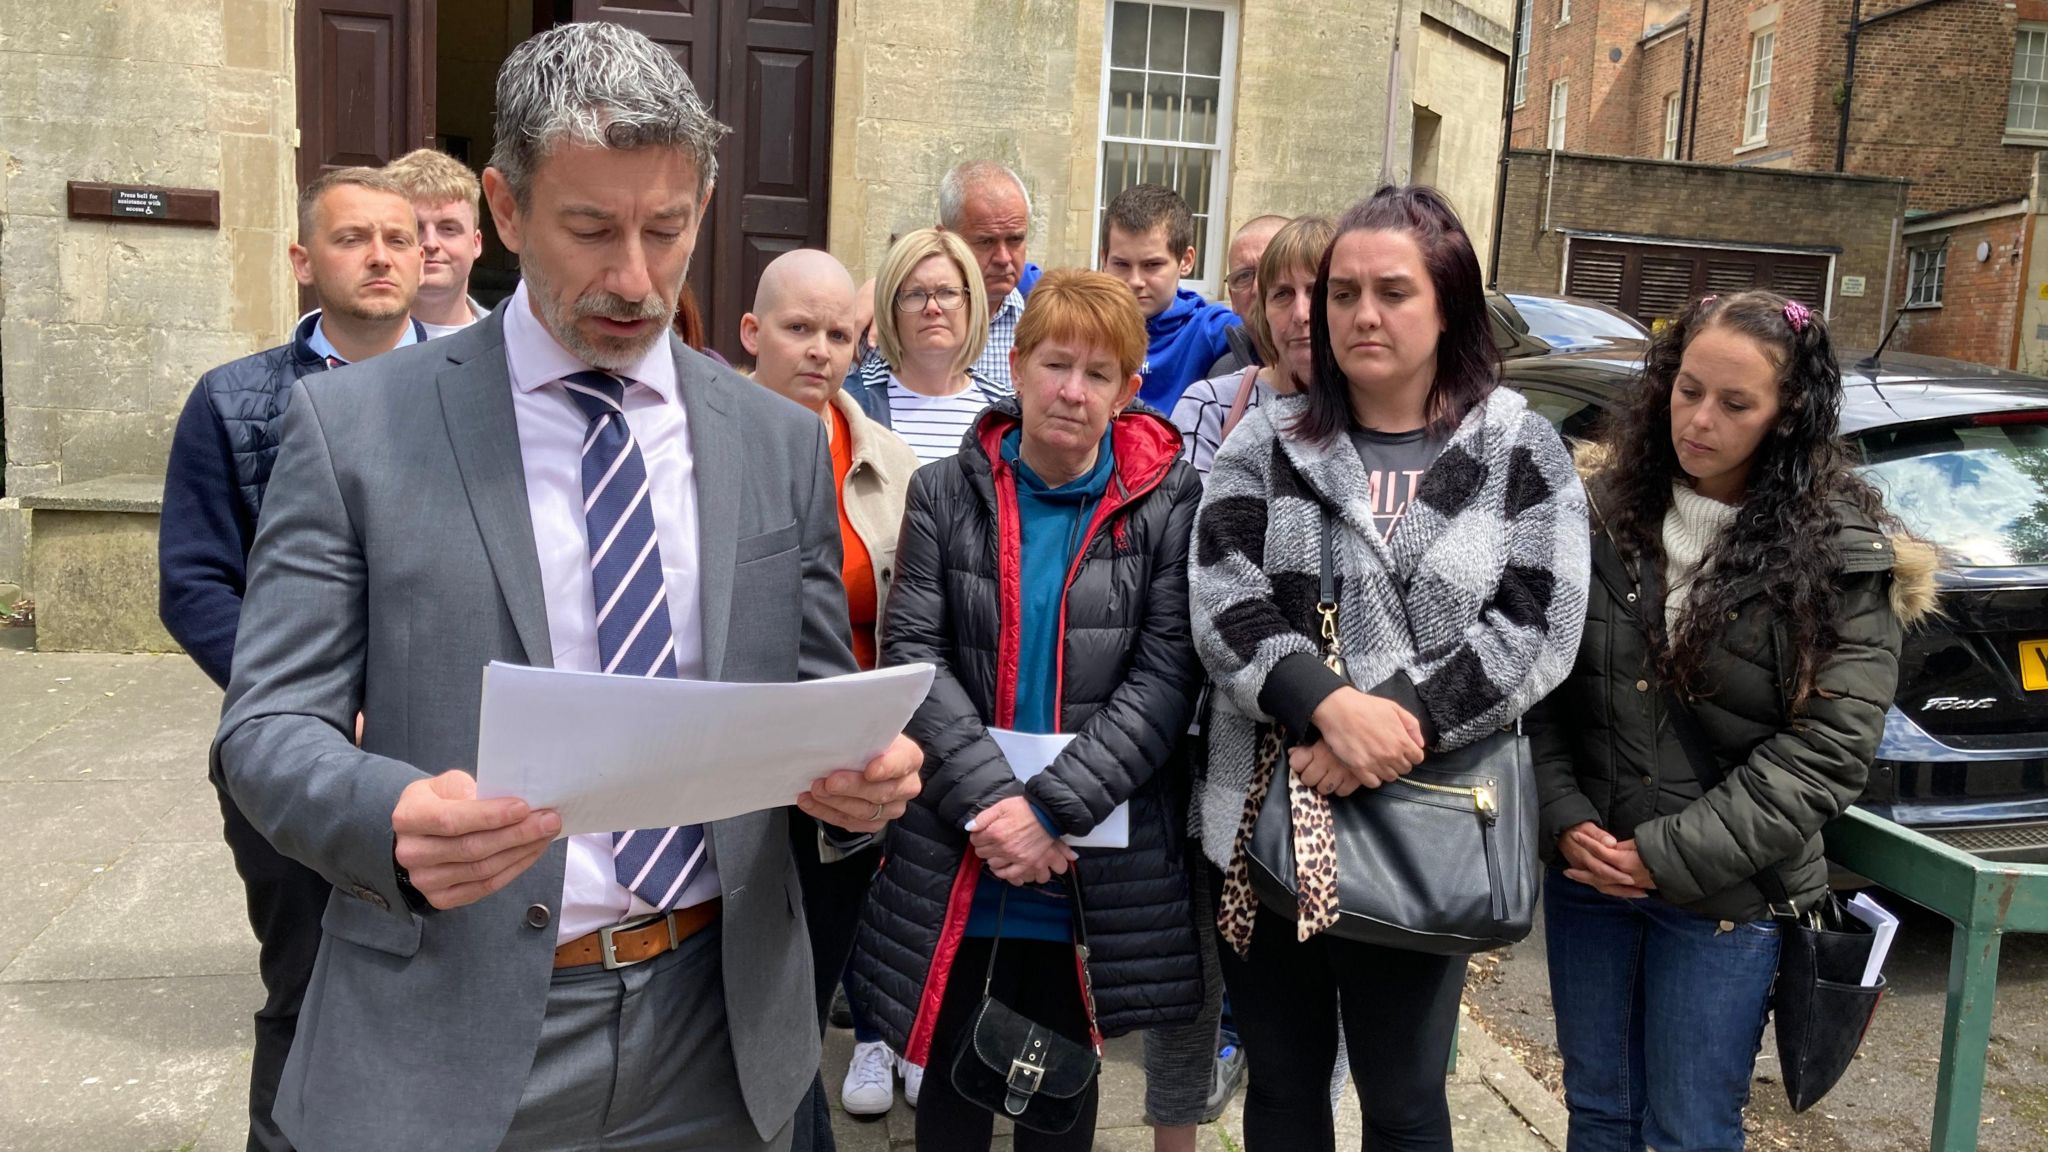 DI Adam stacey reading family statement with Mr Hopkins' family behind